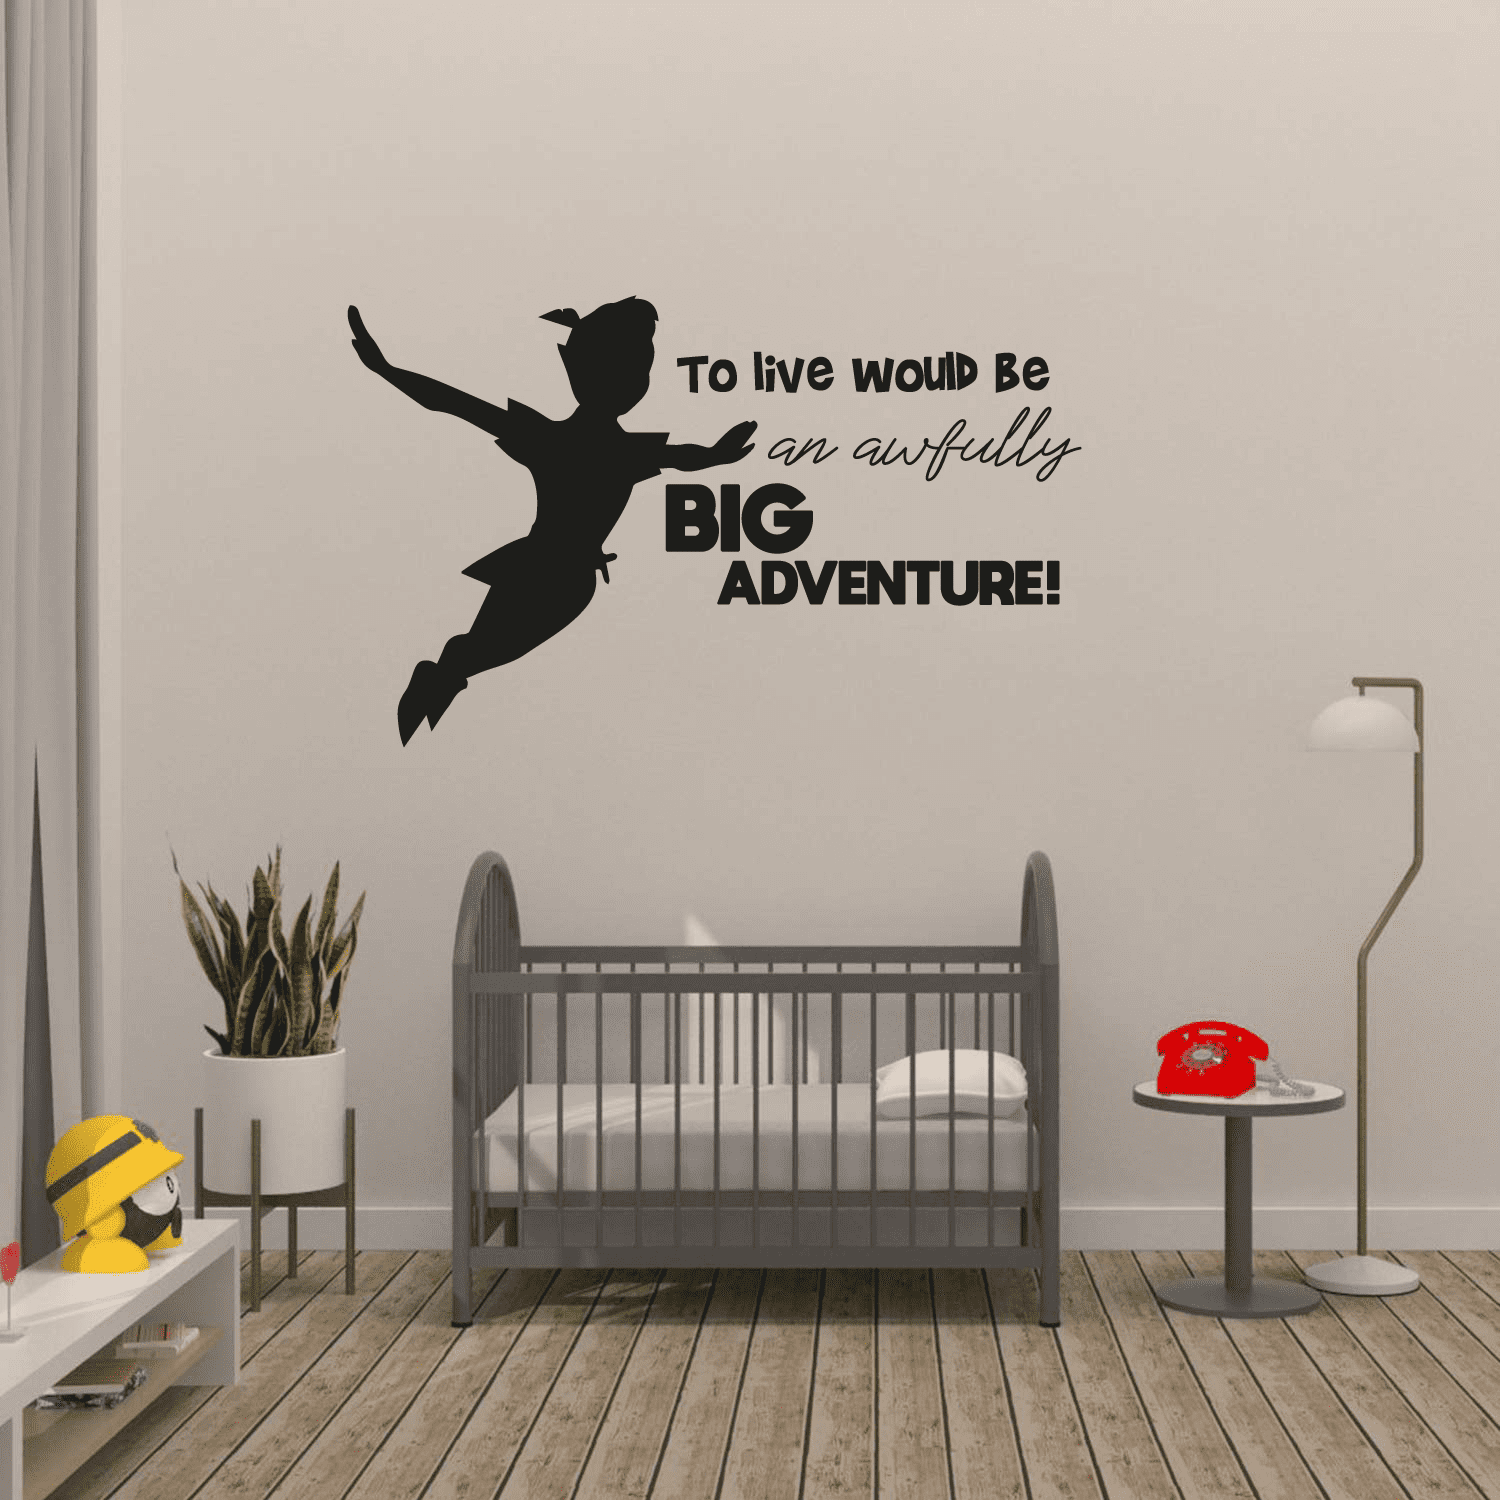 Ship Vinyl Sticker Decal Quote To Live Will Be An Awfully Big Adventure NV11 